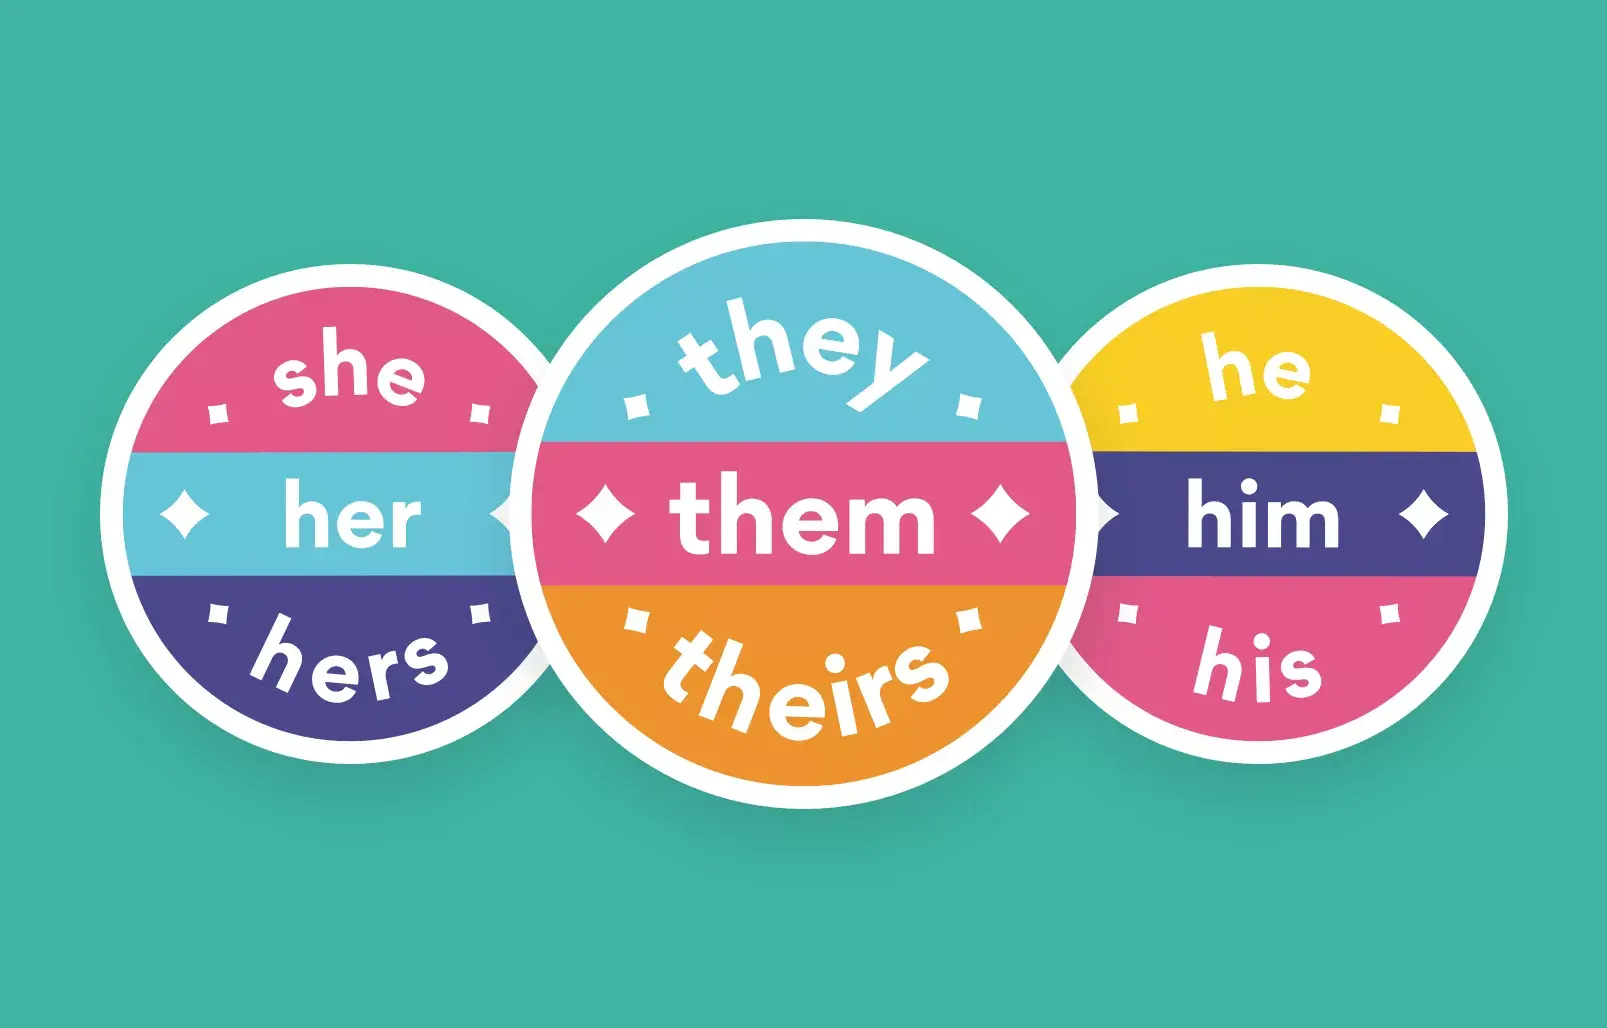 Add pronouns to your profile